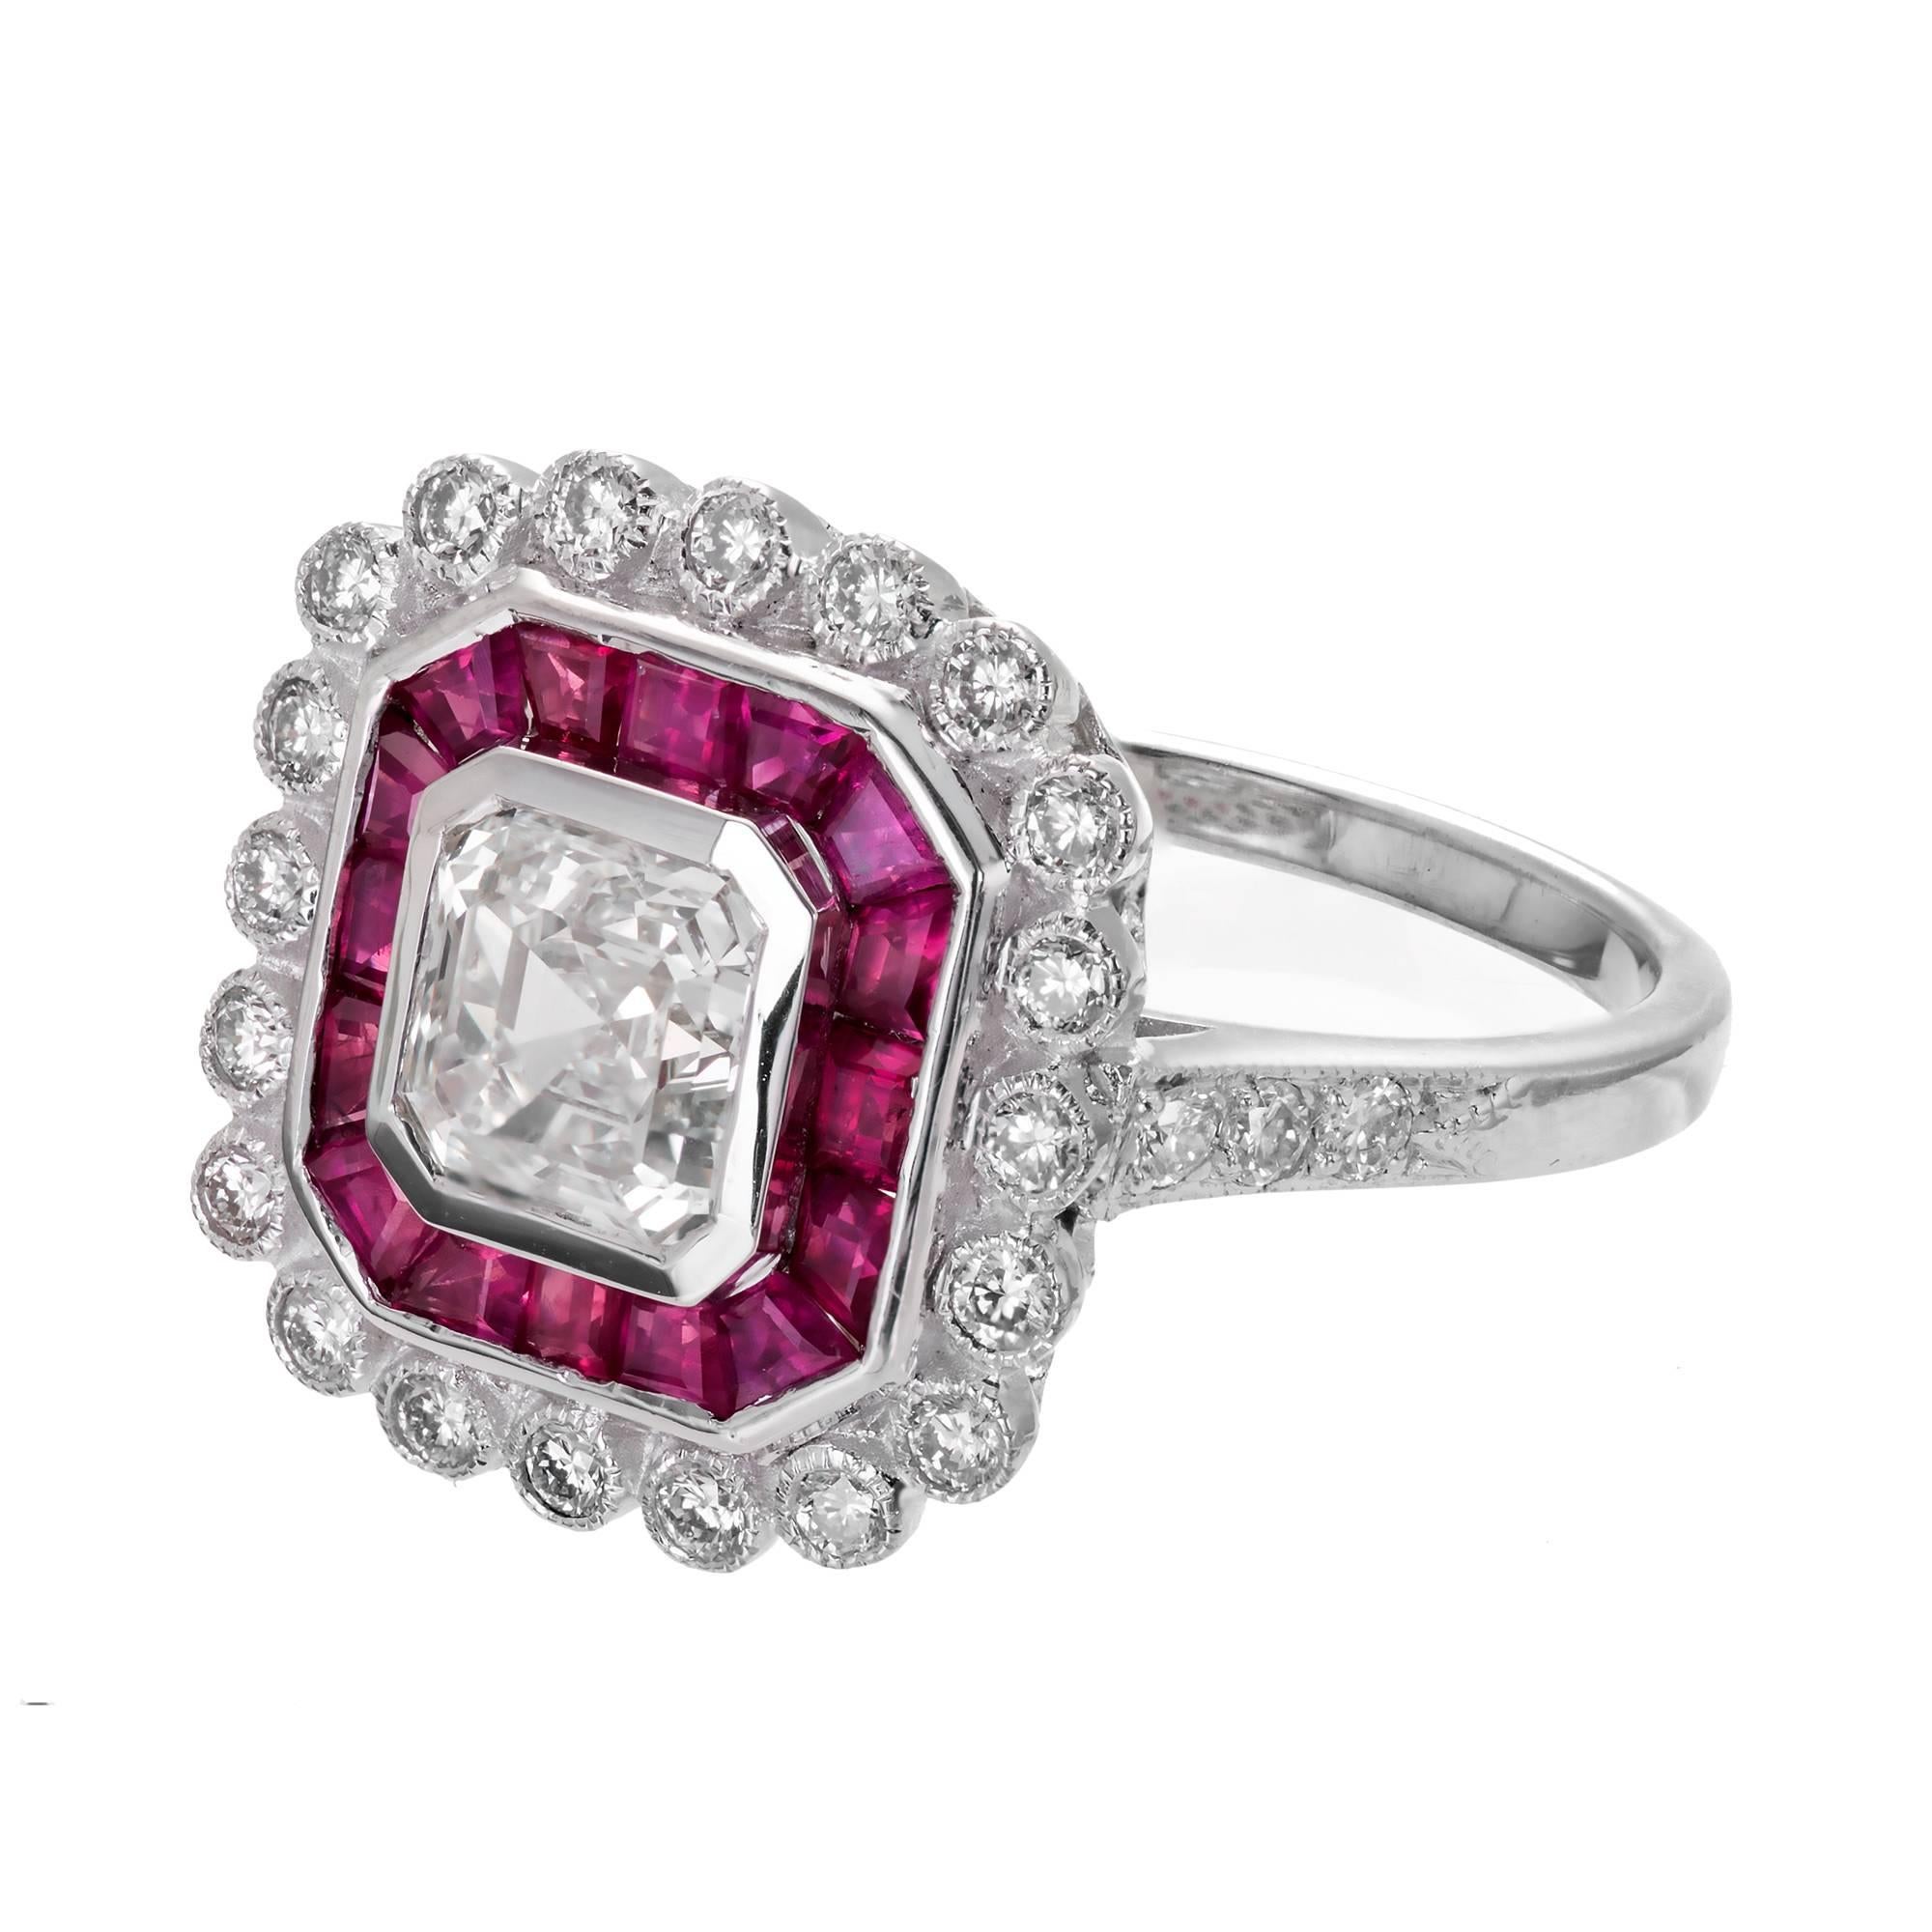  Asscher cut Diamond ring with a halo of bright pink red genuine Rubies and a halo of bright full cut Diamonds. 

1 square Emerald cut Diamond, approx. total weight 1.25cts, I, VS1, 2.27 x 1.54mm, GIA certificate #2171627520
16 custom cut bright